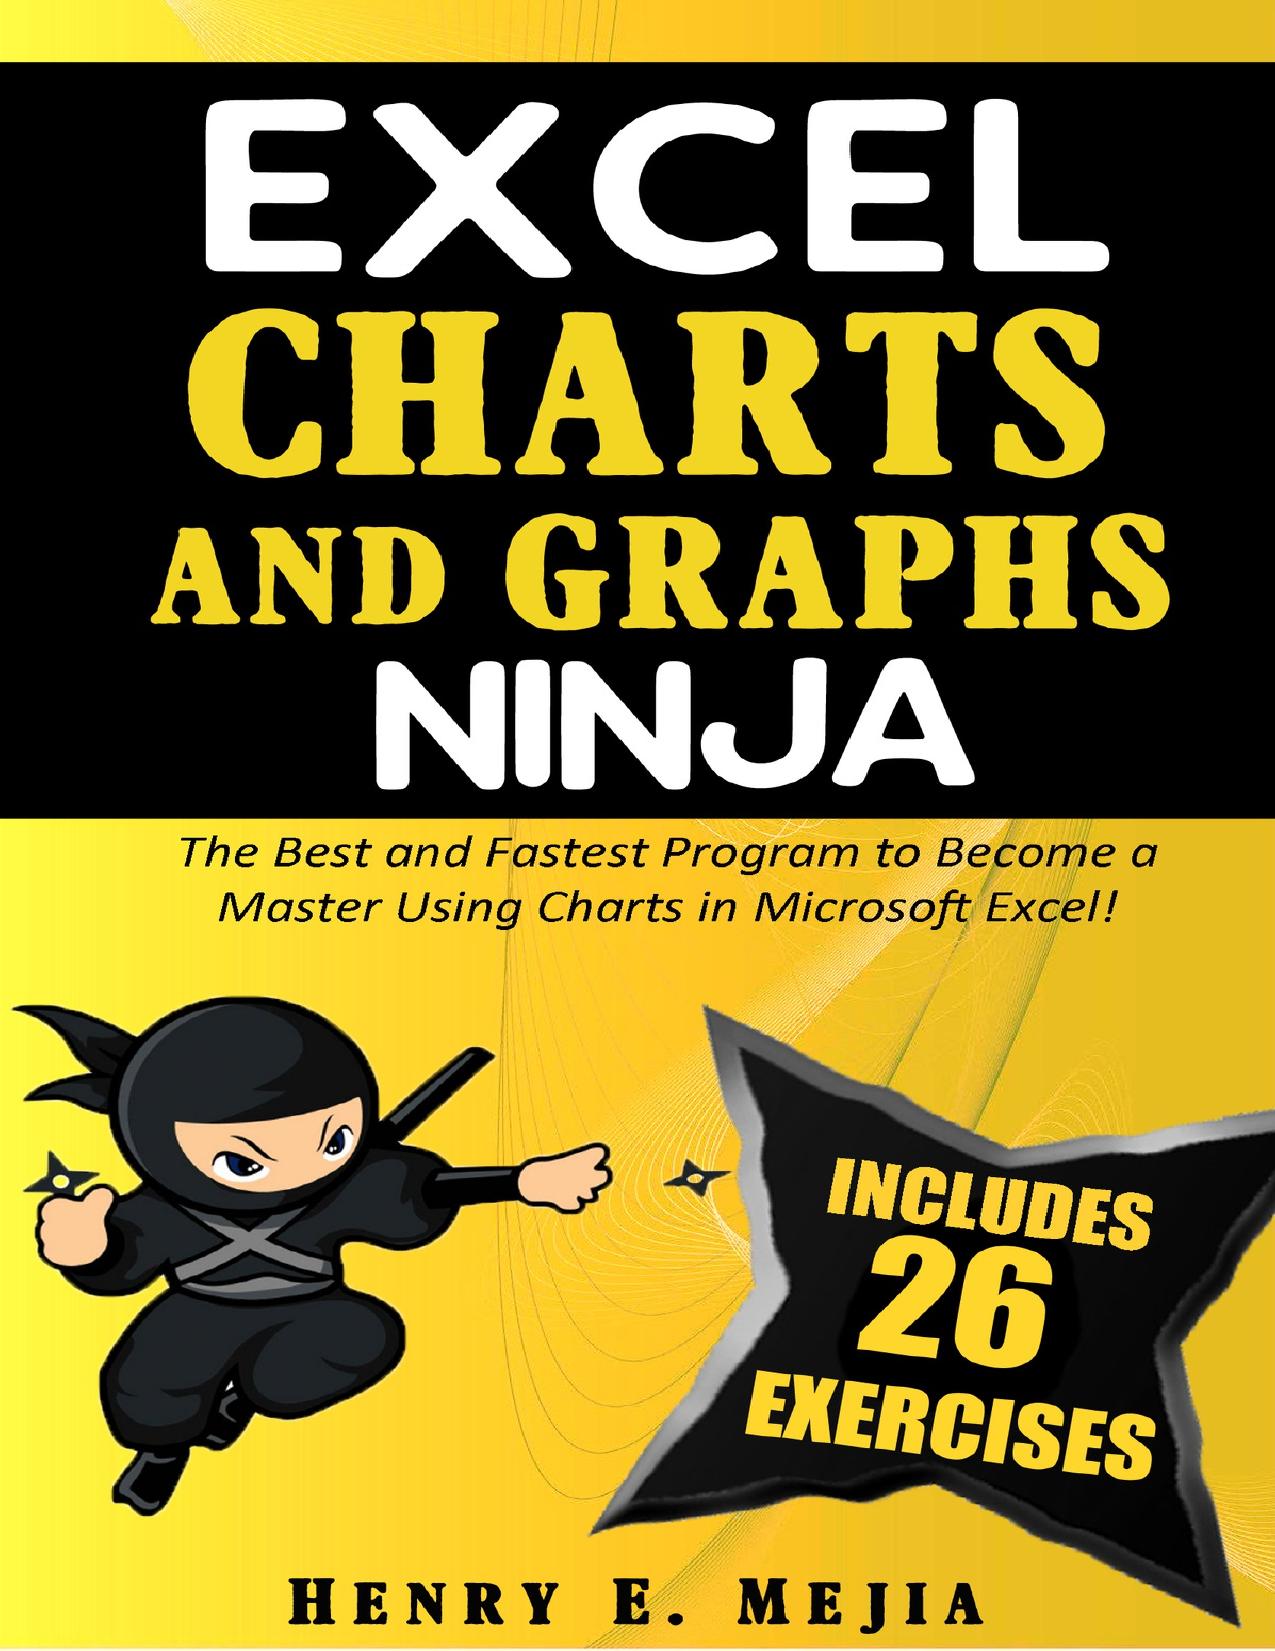 EXCEL CHARTS AND GRAPHS NINJA: The Best and Fastest Program to Become a Master Using Charts and Graphs in Microsoft Excel! by Mejia Henry E